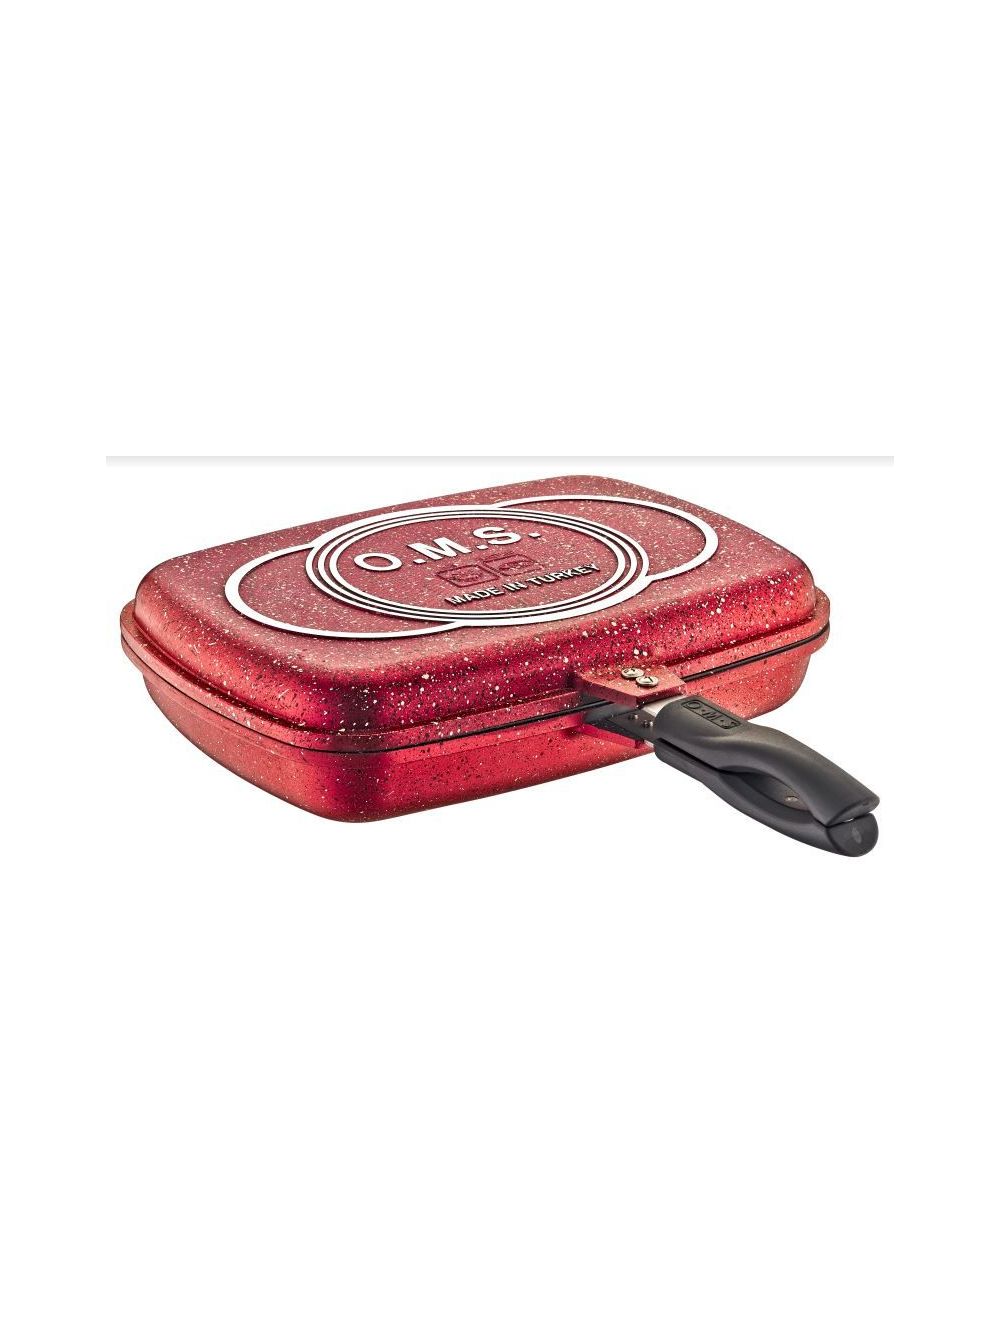 OMS 36 cm Double Sided Granitec Grill Pan-3215 - Red